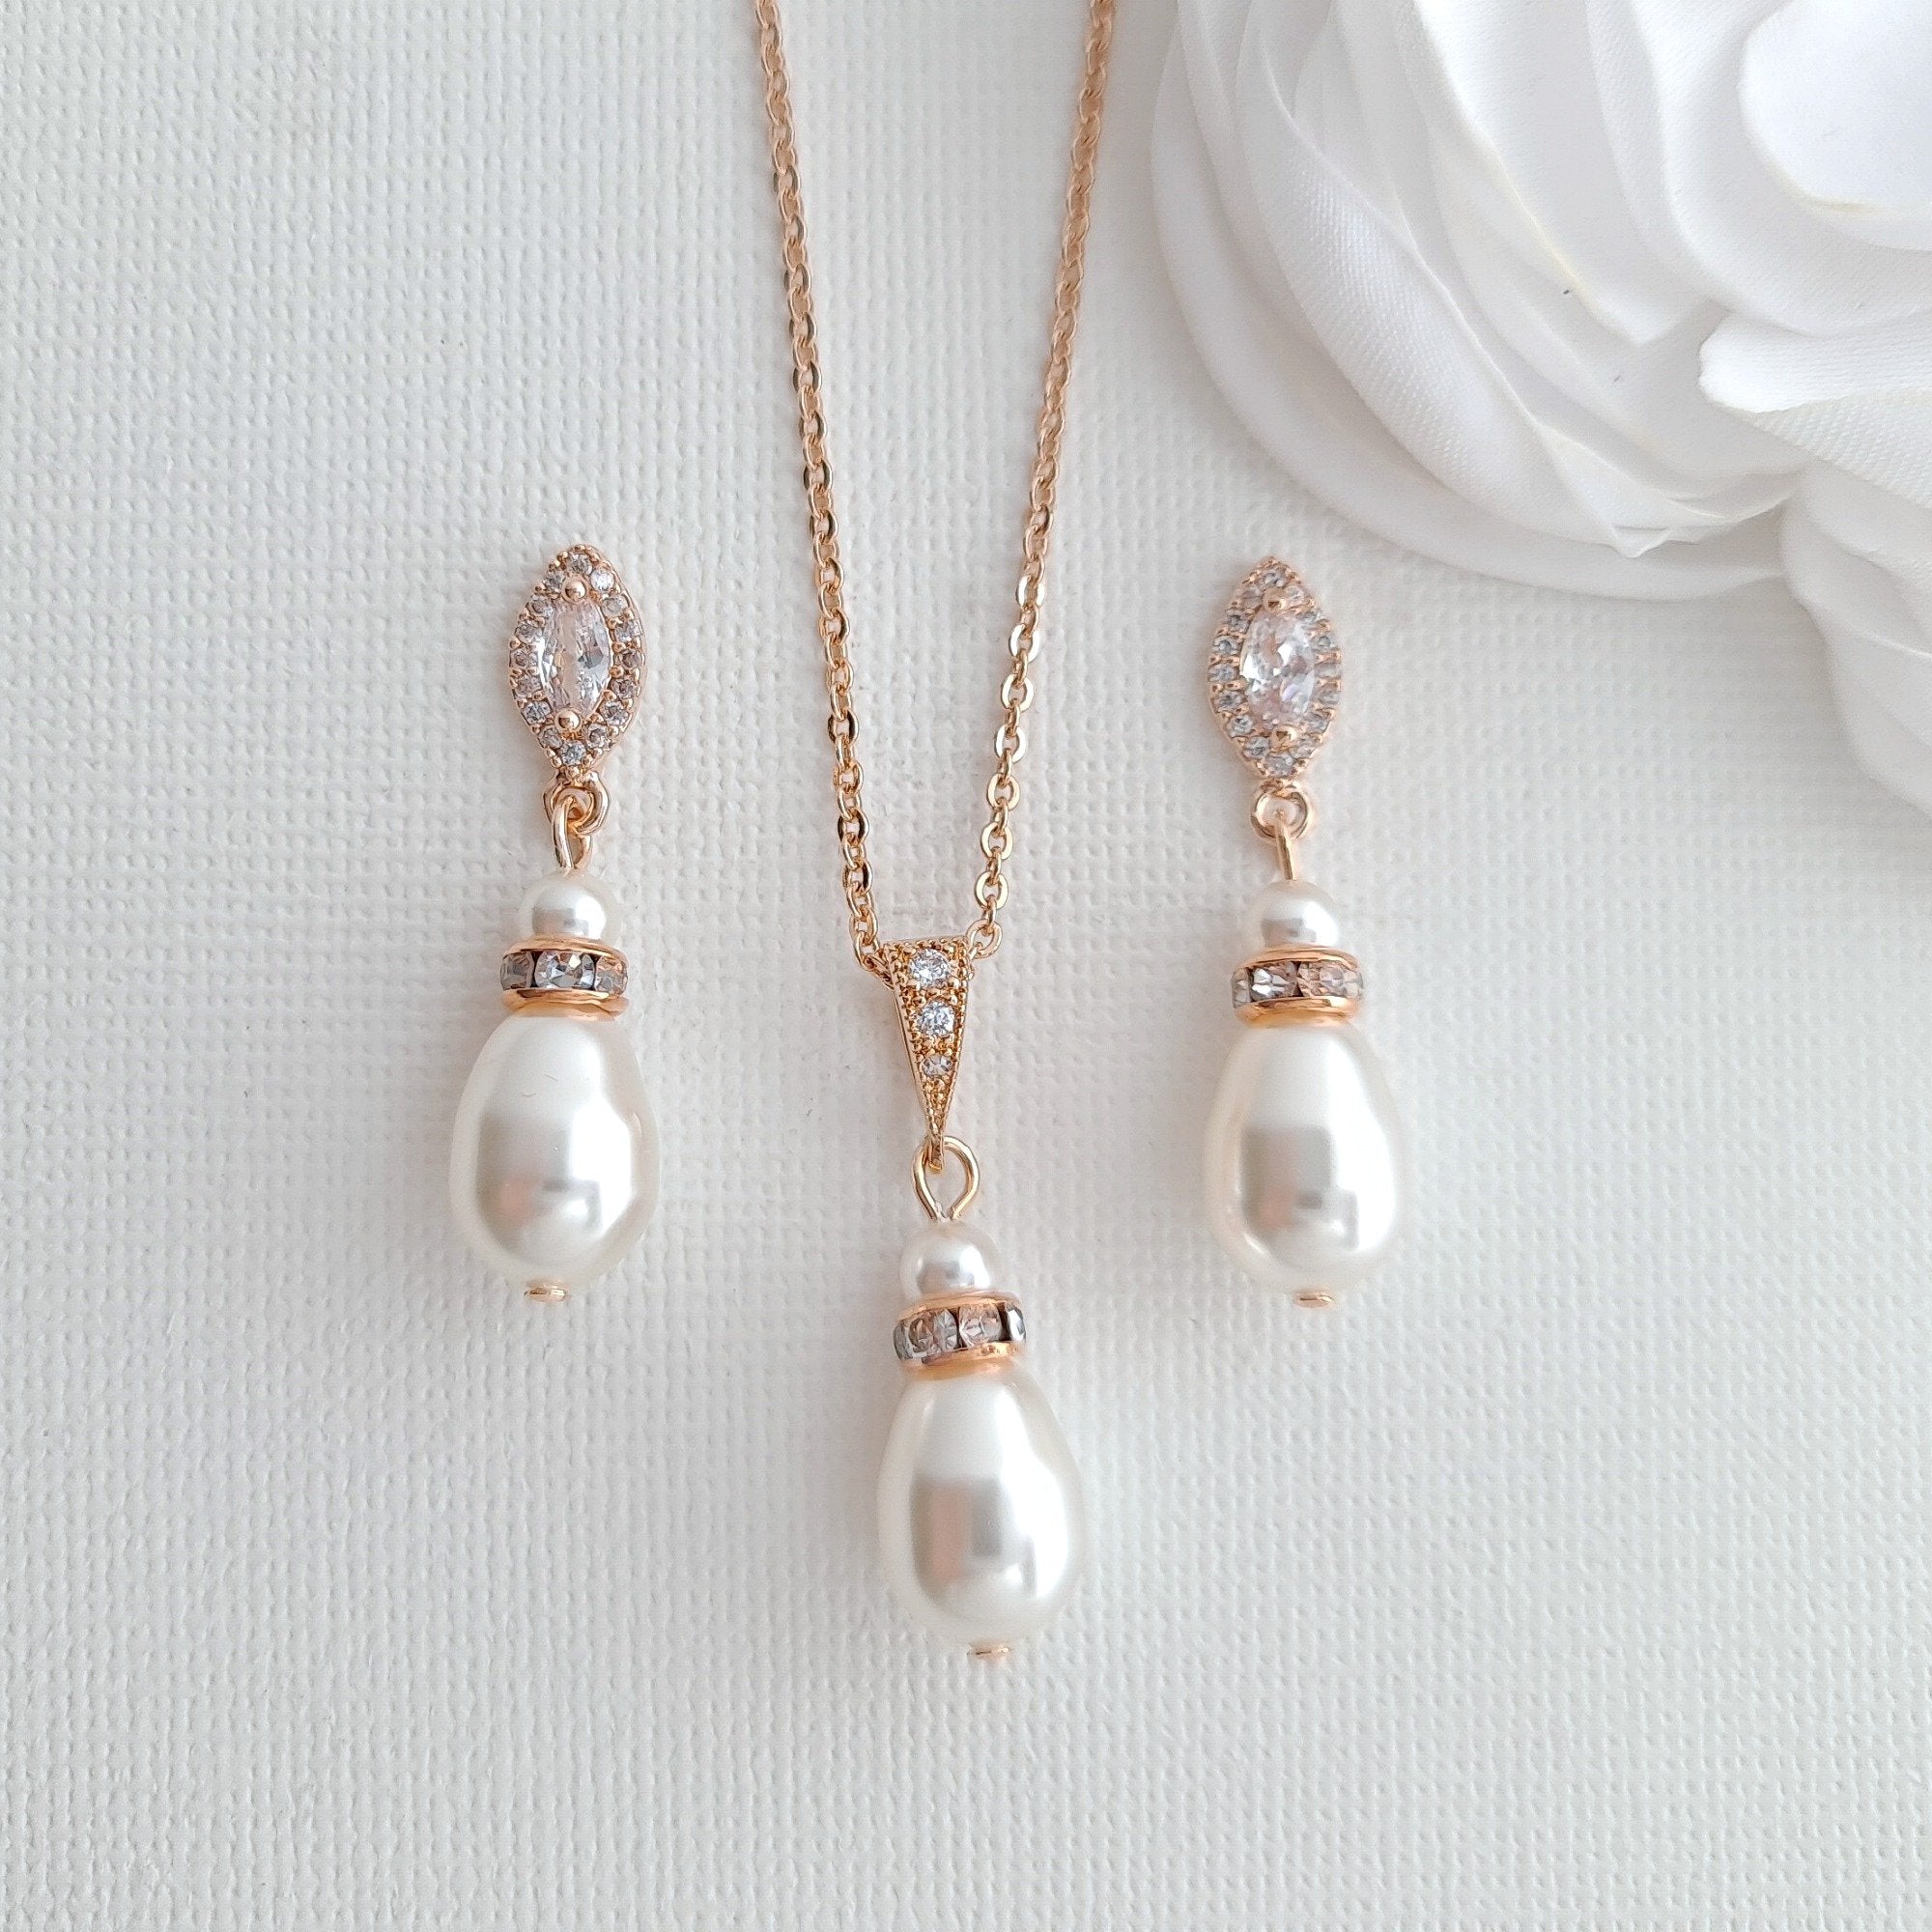 Pearl Jewelry Set with Teardrop Pearl Pendant and Earrings for Brides- Ella